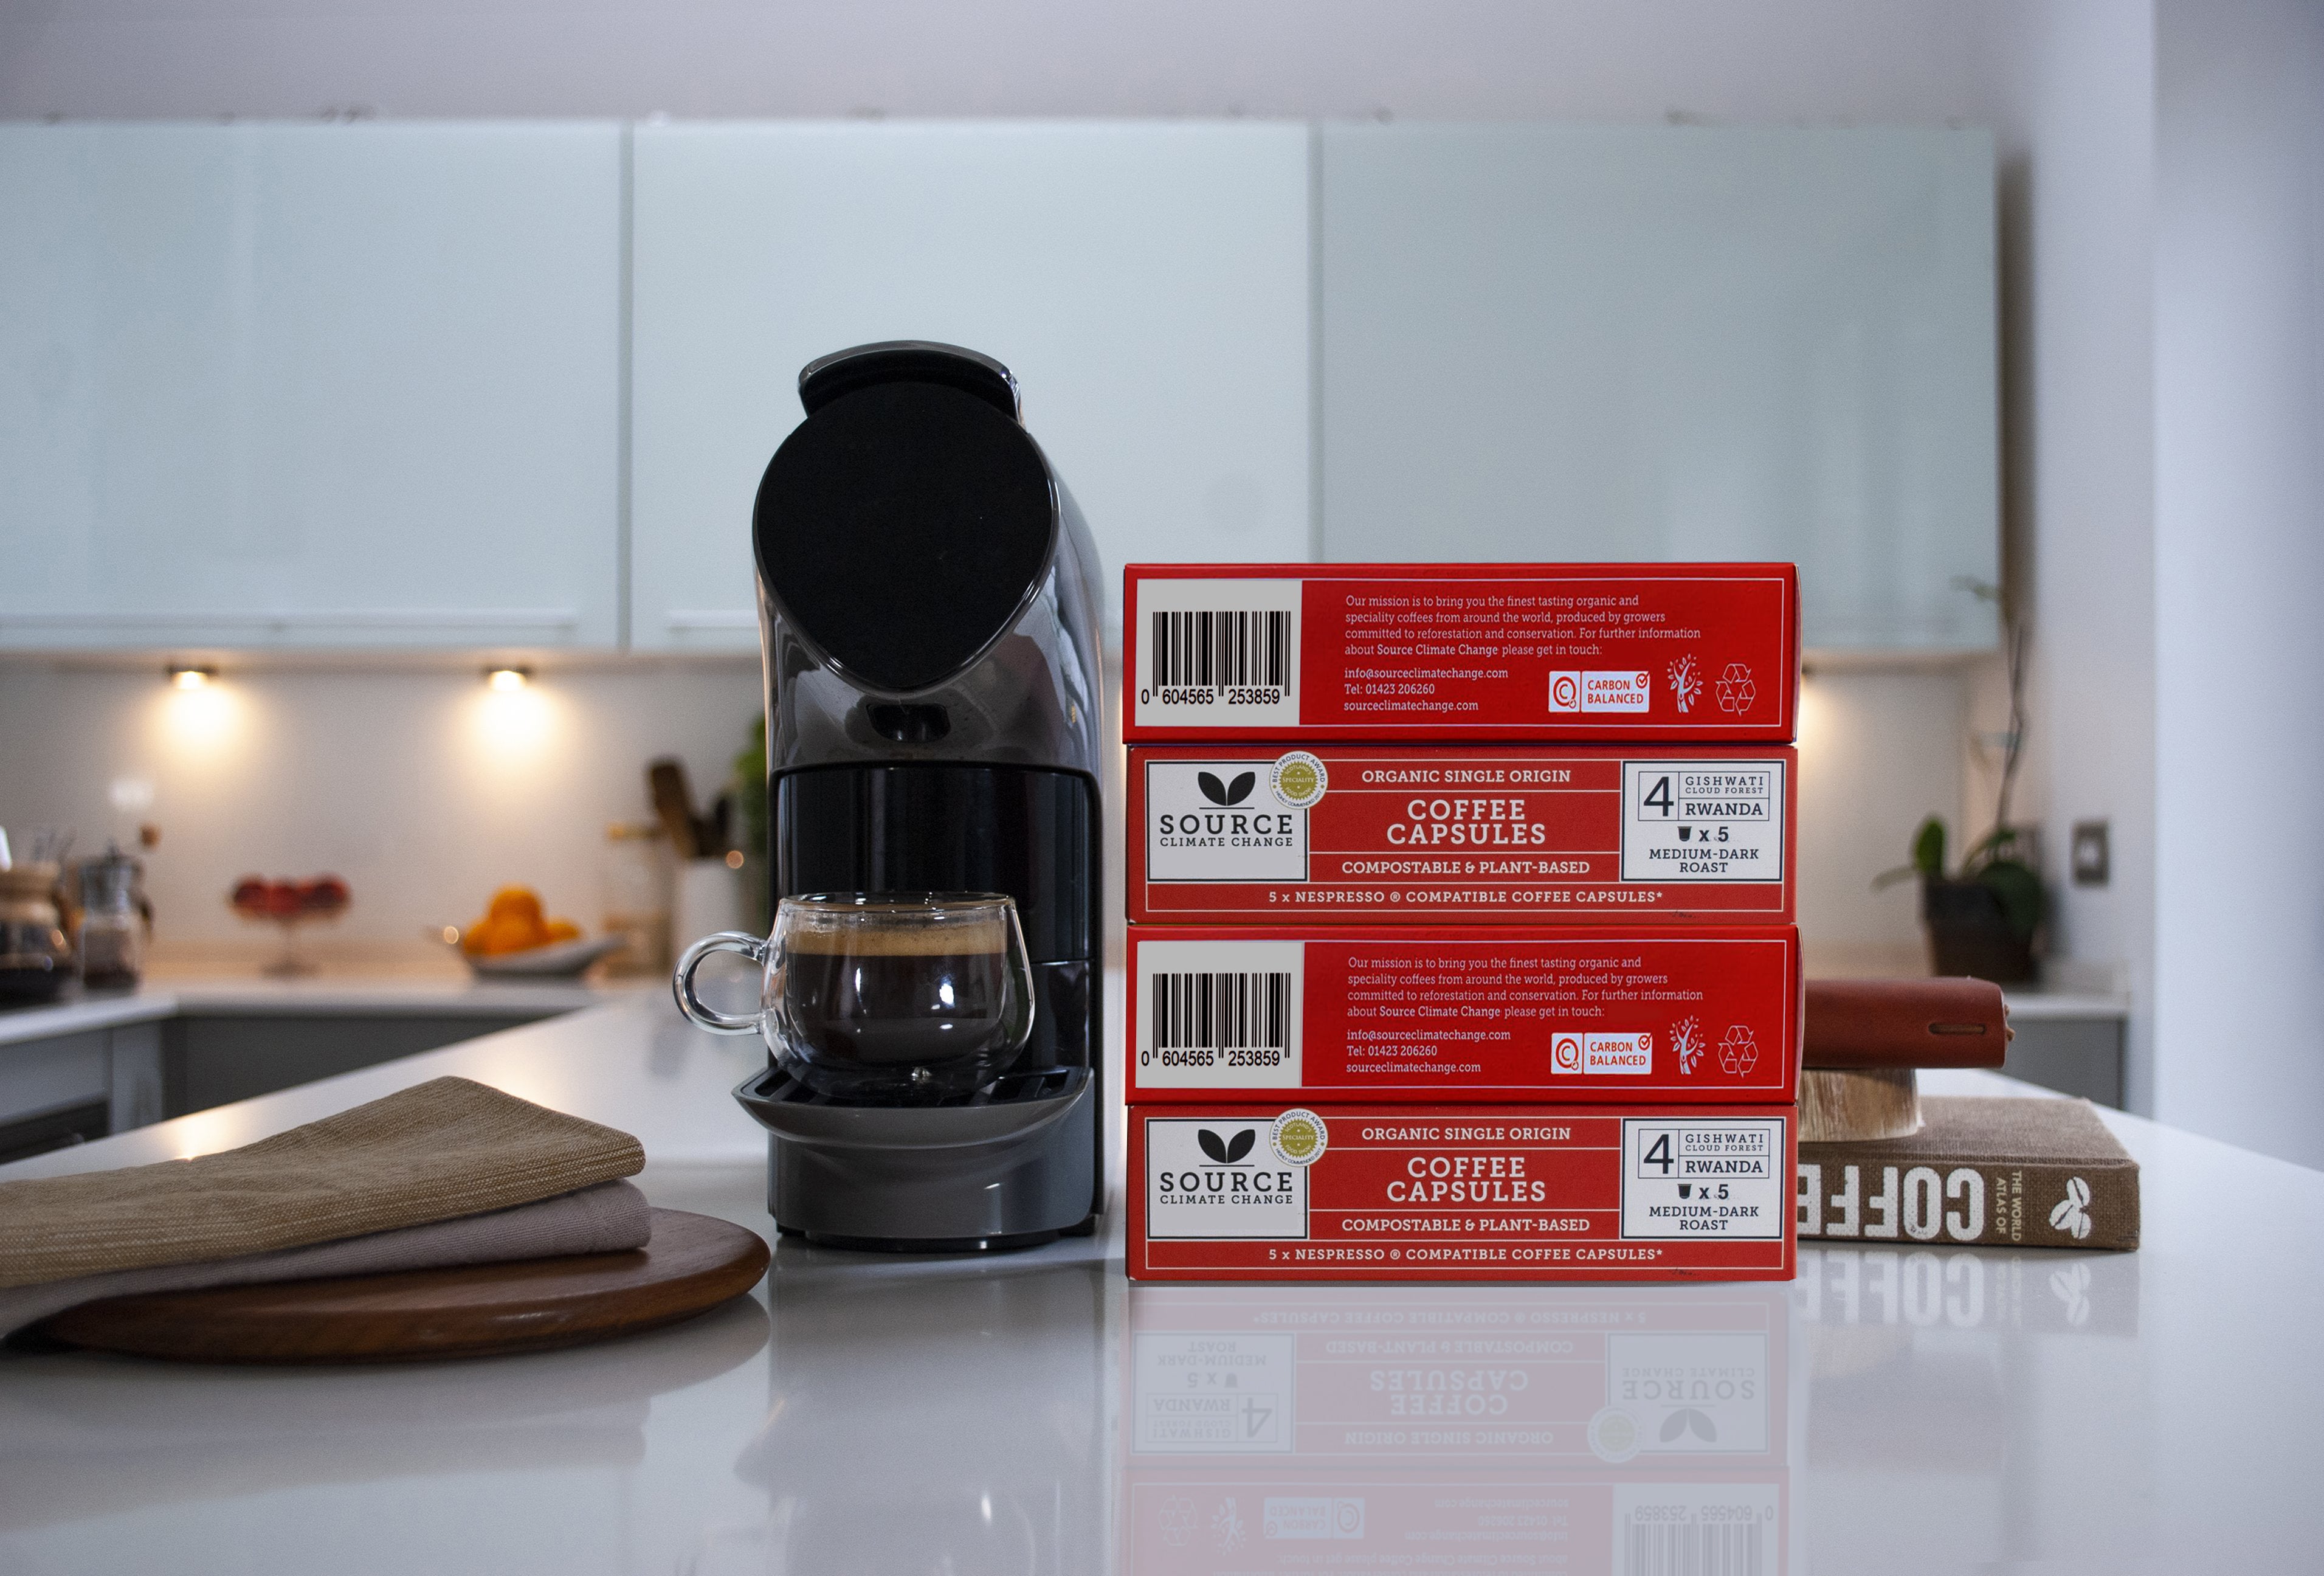 3 Month Coffee Subscription Gift of Biodegradable Nespresso ® Coffee Capsules